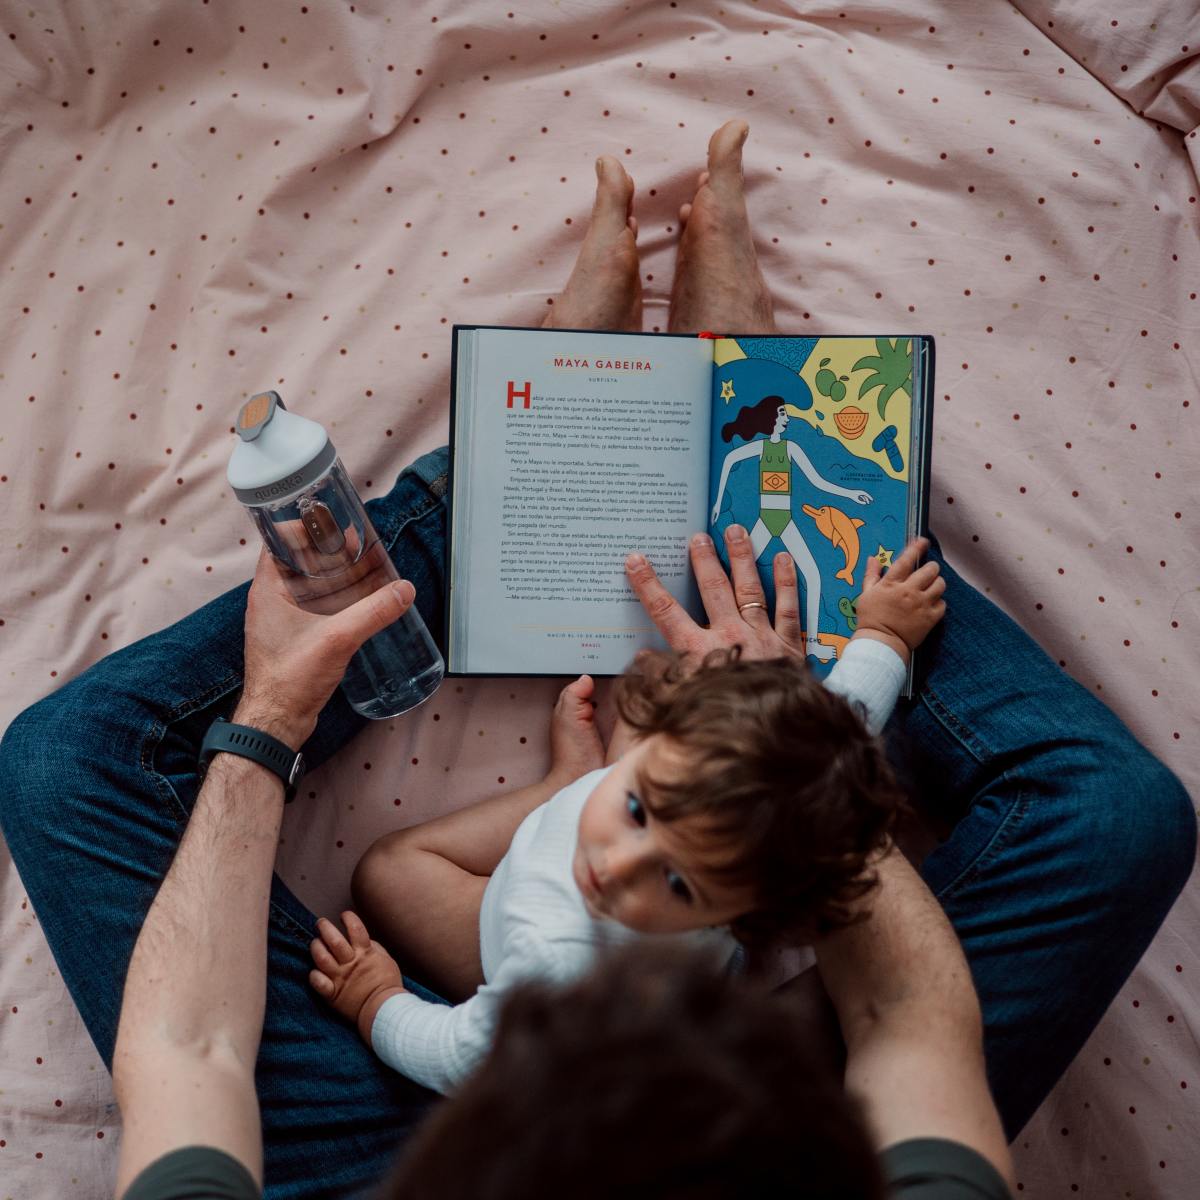 We are born into a world where our elders, whether parents, grandparents, uncles, aunts, or others, read to us about Prince Charming and Cinderella before we could even walk.